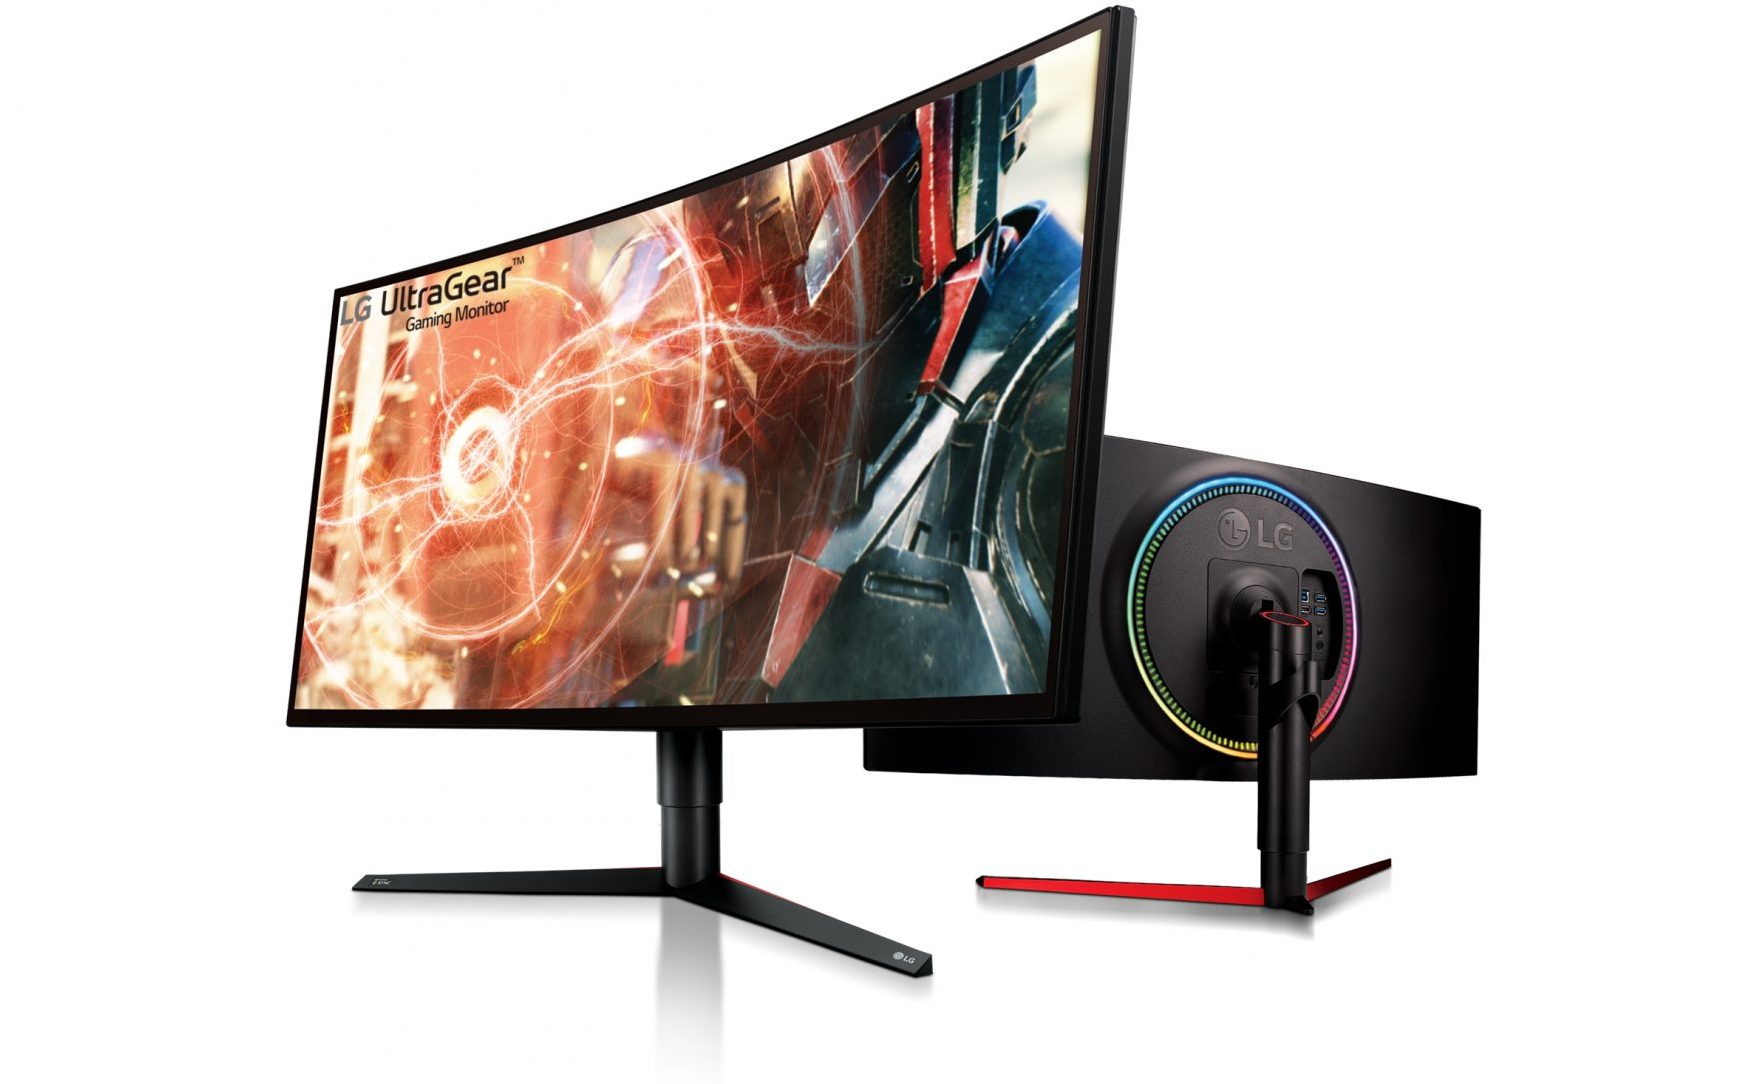 LG announces new ultrawide gaming monitor UltraGear 34GK950G with